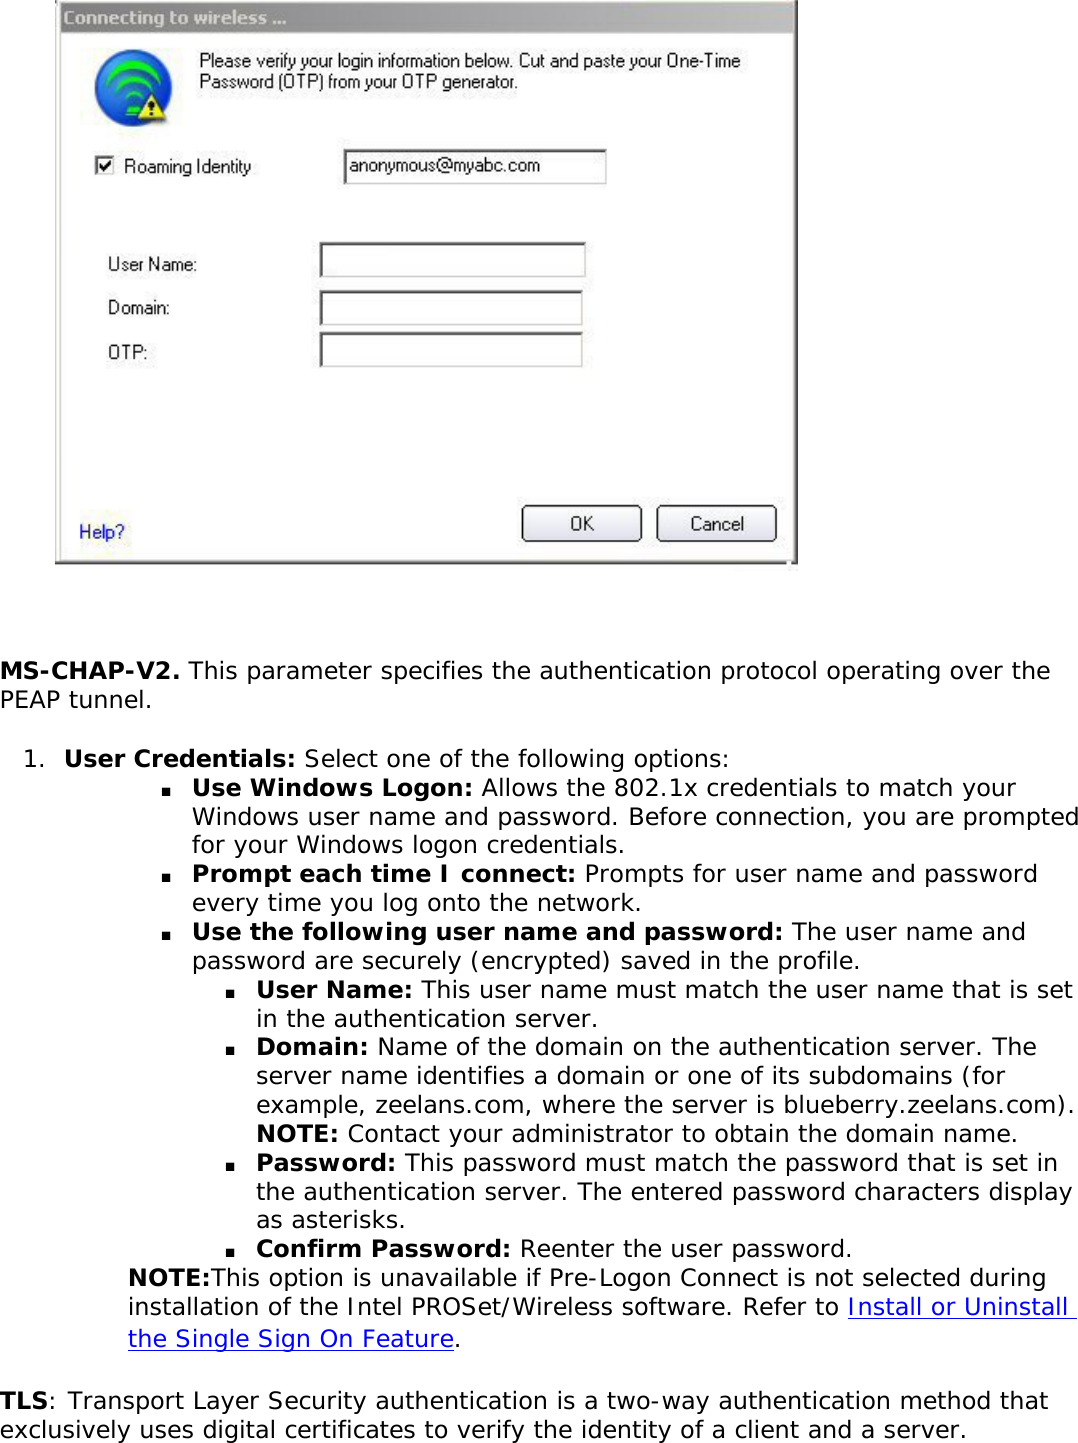 MS-CHAP-V2. This parameter specifies the authentication protocol operating over the PEAP tunnel. 1.  User Credentials: Select one of the following options: ■     Use Windows Logon: Allows the 802.1x credentials to match your Windows user name and password. Before connection, you are prompted for your Windows logon credentials.■     Prompt each time I connect: Prompts for user name and password every time you log onto the network. ■     Use the following user name and password: The user name and password are securely (encrypted) saved in the profile. ■     User Name: This user name must match the user name that is set in the authentication server. ■     Domain: Name of the domain on the authentication server. The server name identifies a domain or one of its subdomains (for example, zeelans.com, where the server is blueberry.zeelans.com). NOTE: Contact your administrator to obtain the domain name. ■     Password: This password must match the password that is set in the authentication server. The entered password characters display as asterisks. ■     Confirm Password: Reenter the user password.NOTE:This option is unavailable if Pre-Logon Connect is not selected during installation of the Intel PROSet/Wireless software. Refer to Install or Uninstall the Single Sign On Feature. TLS: Transport Layer Security authentication is a two-way authentication method that exclusively uses digital certificates to verify the identity of a client and a server. 